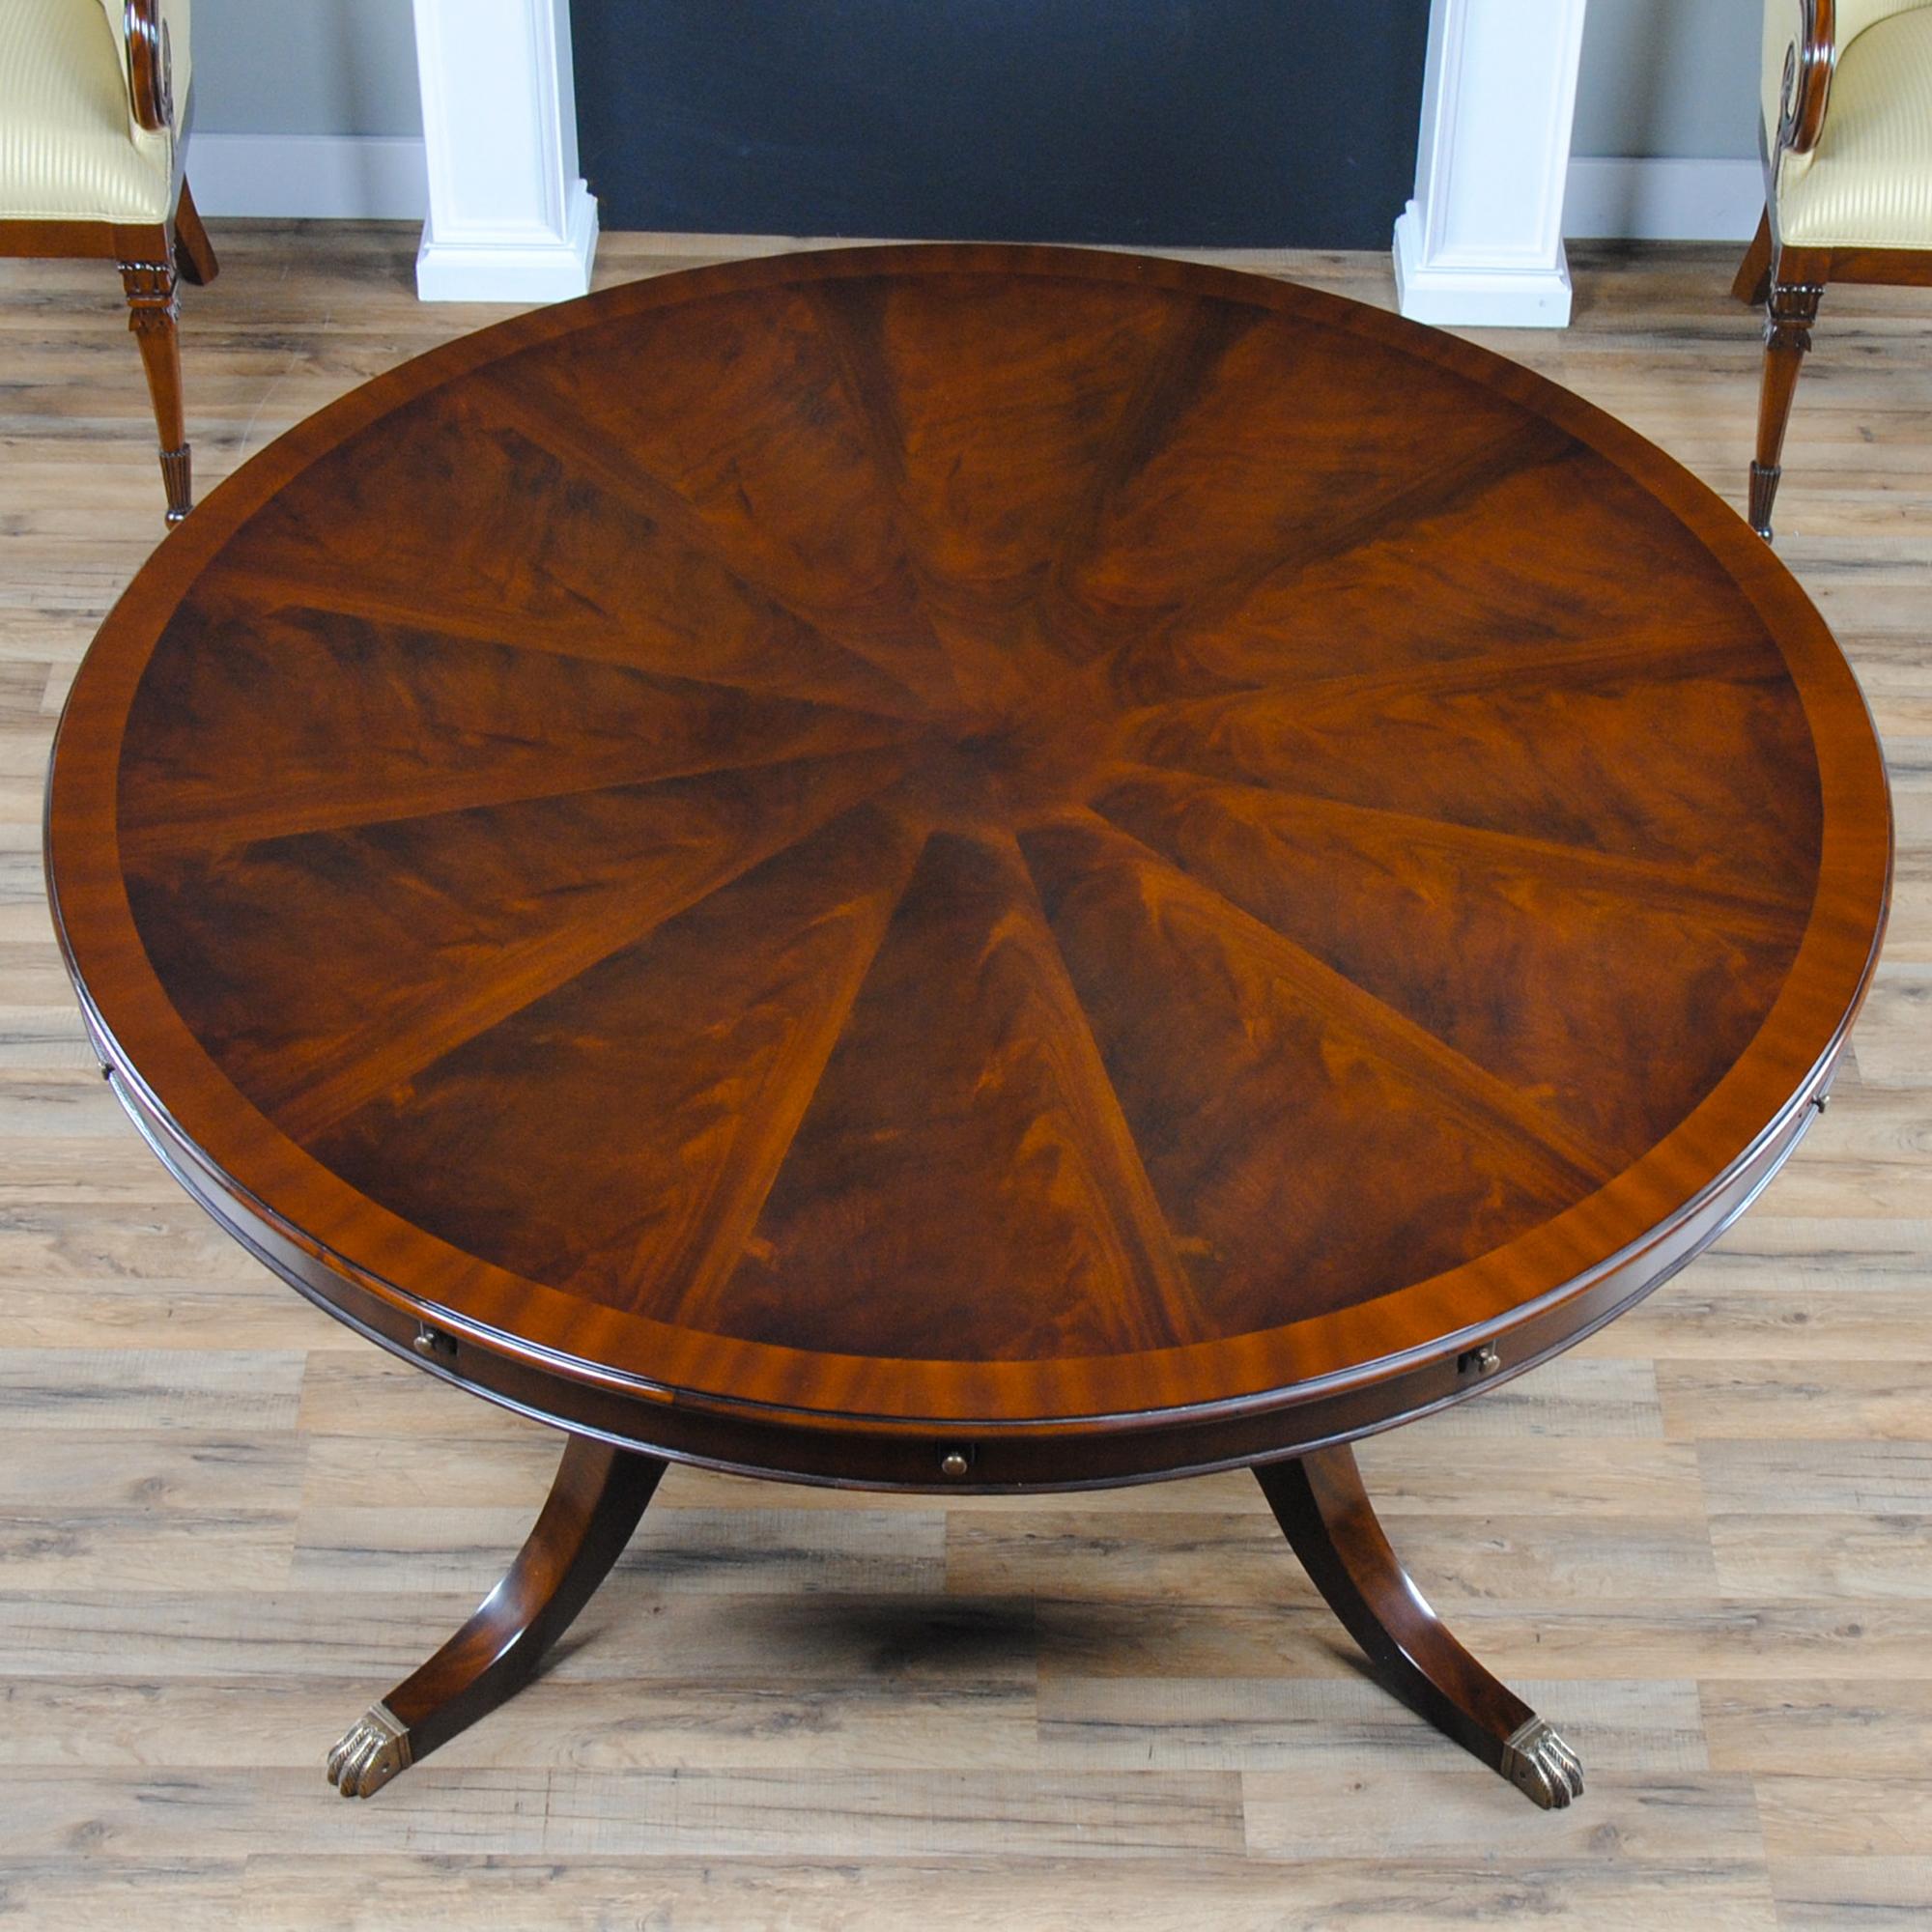 A sixty inch round Perimeter Dining Table produced with a high quality figured mahogany field and sapele banding makes for a subtle but interesting contrast in the pattern on the top. Surrounding the top can be placed six leaves which rest on